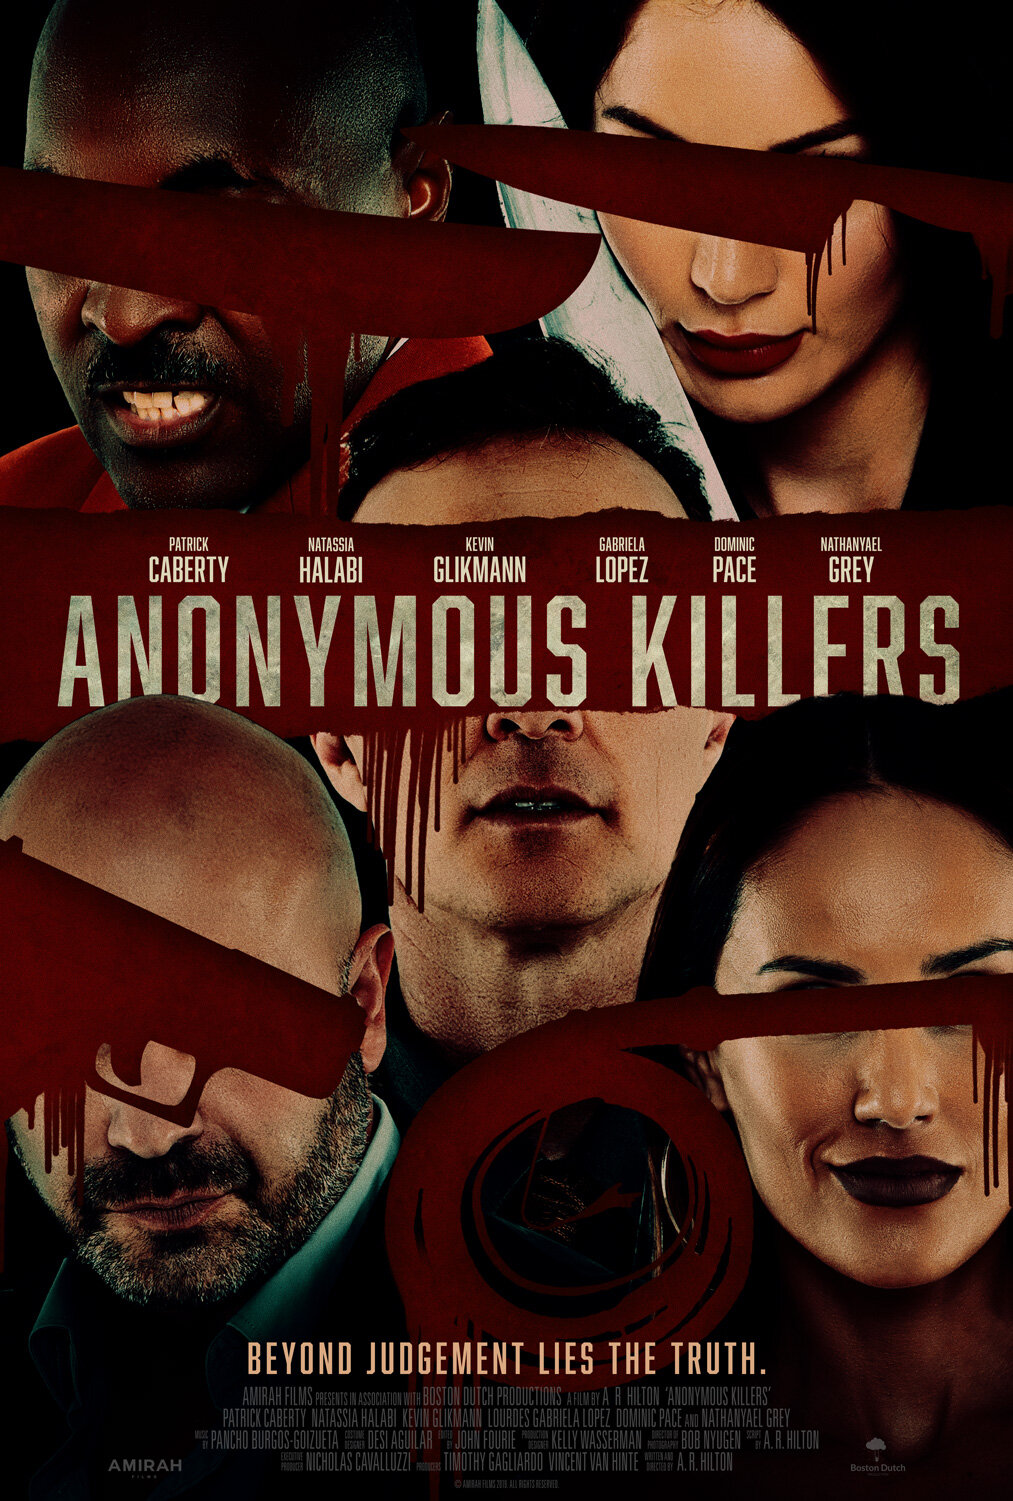 poster-anonymouskillers.jpg